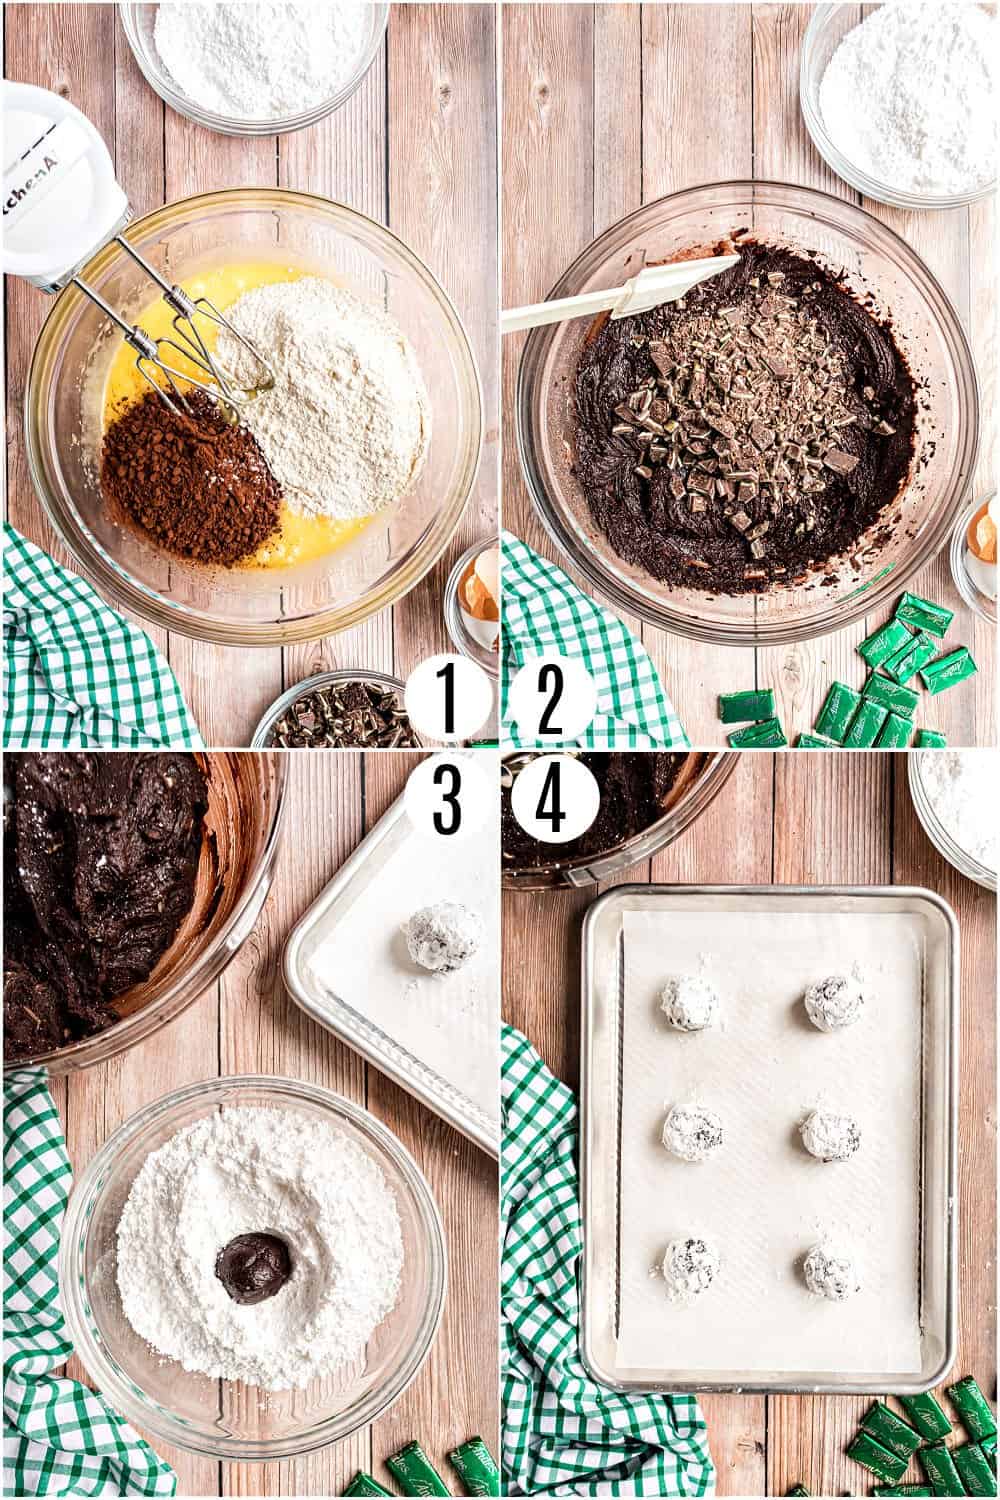 Step by step photos showing how to make chocolate crinkle cookies with andes mints.